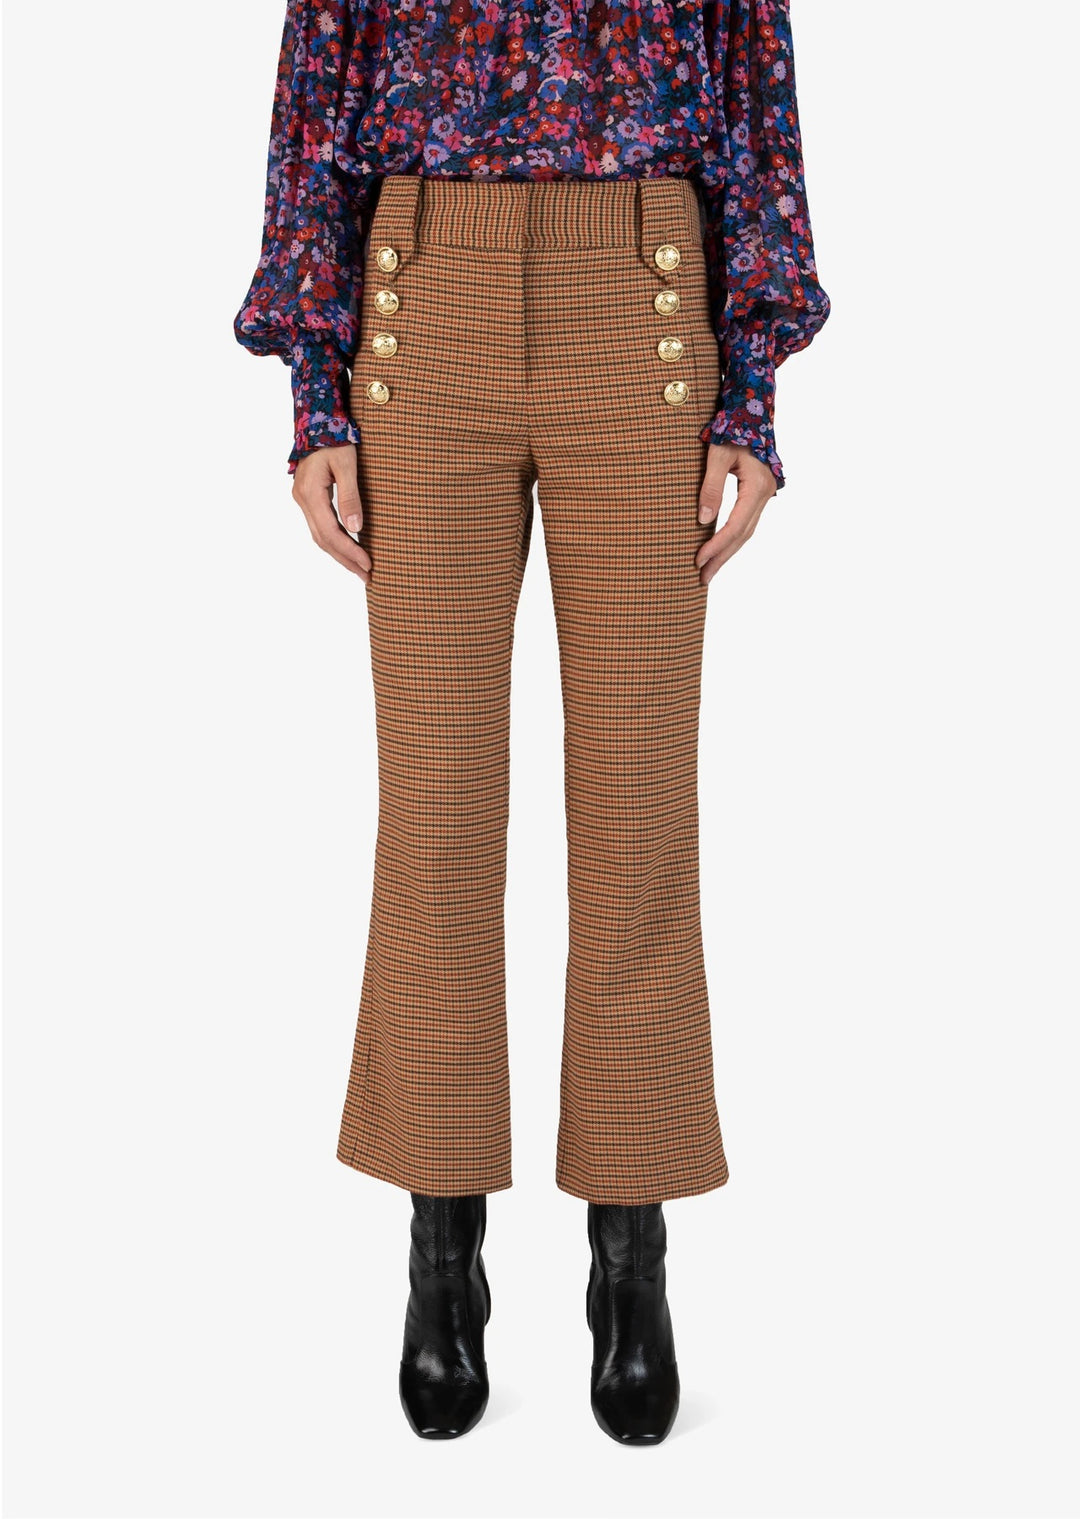 Derek Lam 10 Crosby - Corinna Cropped Flare w/ Sailor Buttons in Rust Multi